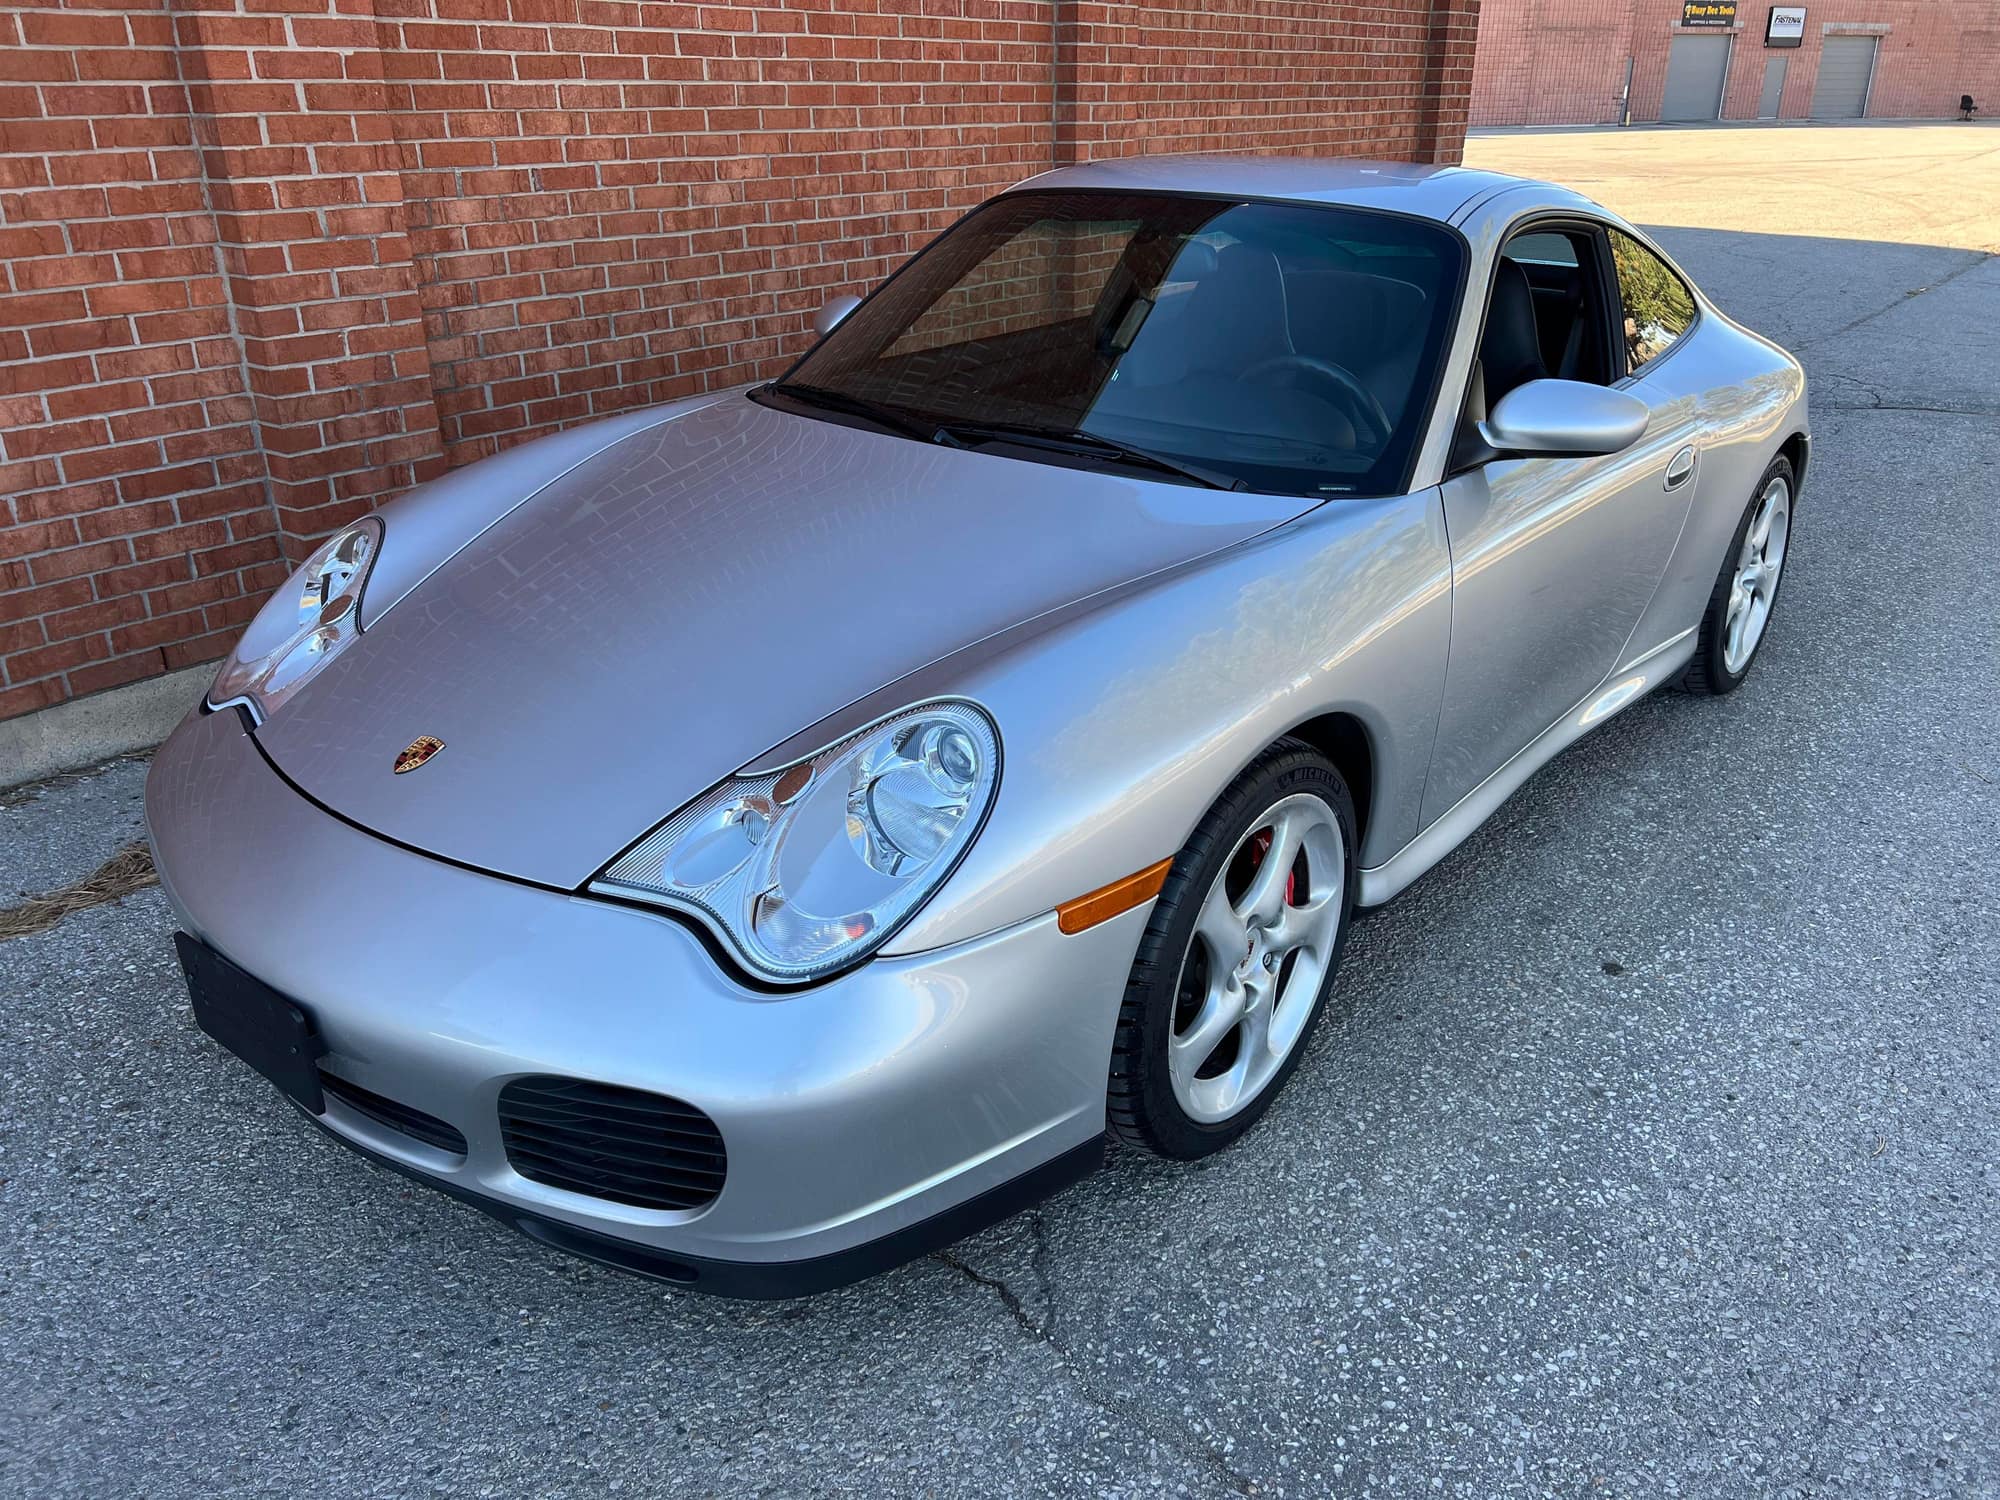 2002 Porsche 911 - 2002 Porsche 911 (996) Carrera 4S - 6-speed - 22k miles - Sport Seats/Sport Exhaust - Used - VIN WP0AA29982S623453 - 22,100 Miles - 6 cyl - AWD - Manual - Coupe - Silver - Detroit, MI 48236, United States